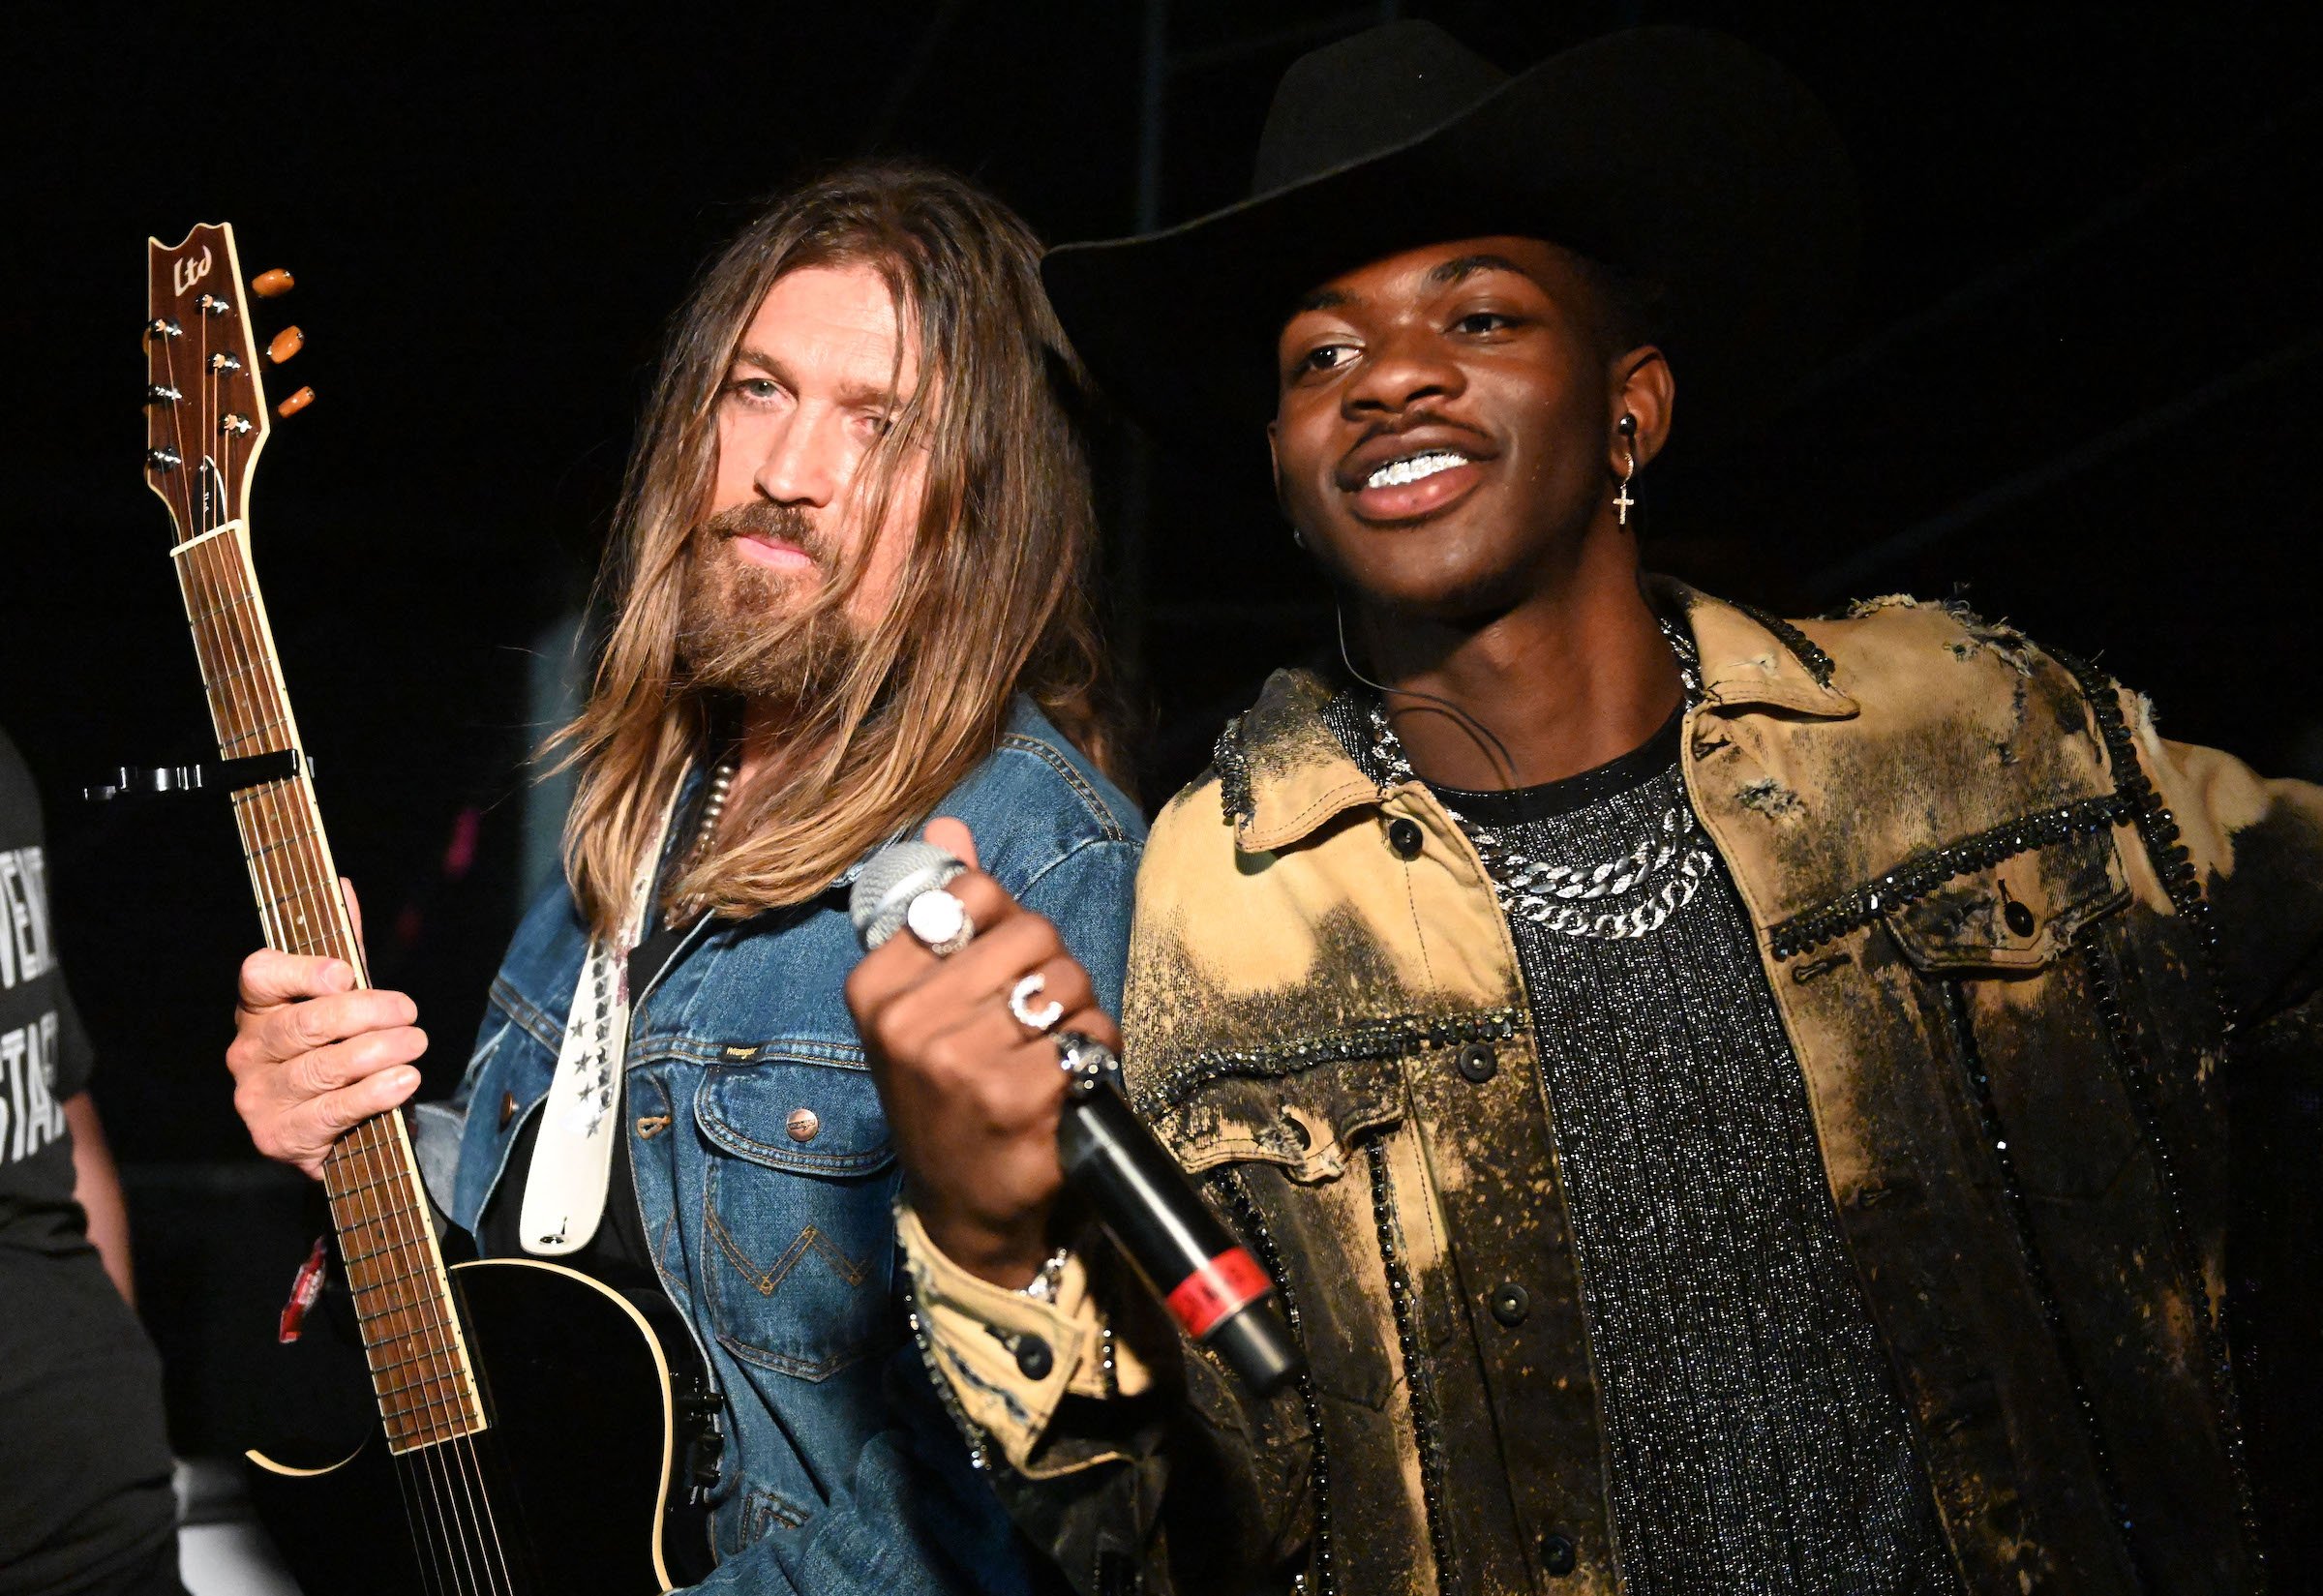 Billy Ray Cyrus and Lil Nas X attend Day 3 of the Stagecoach Music Festival